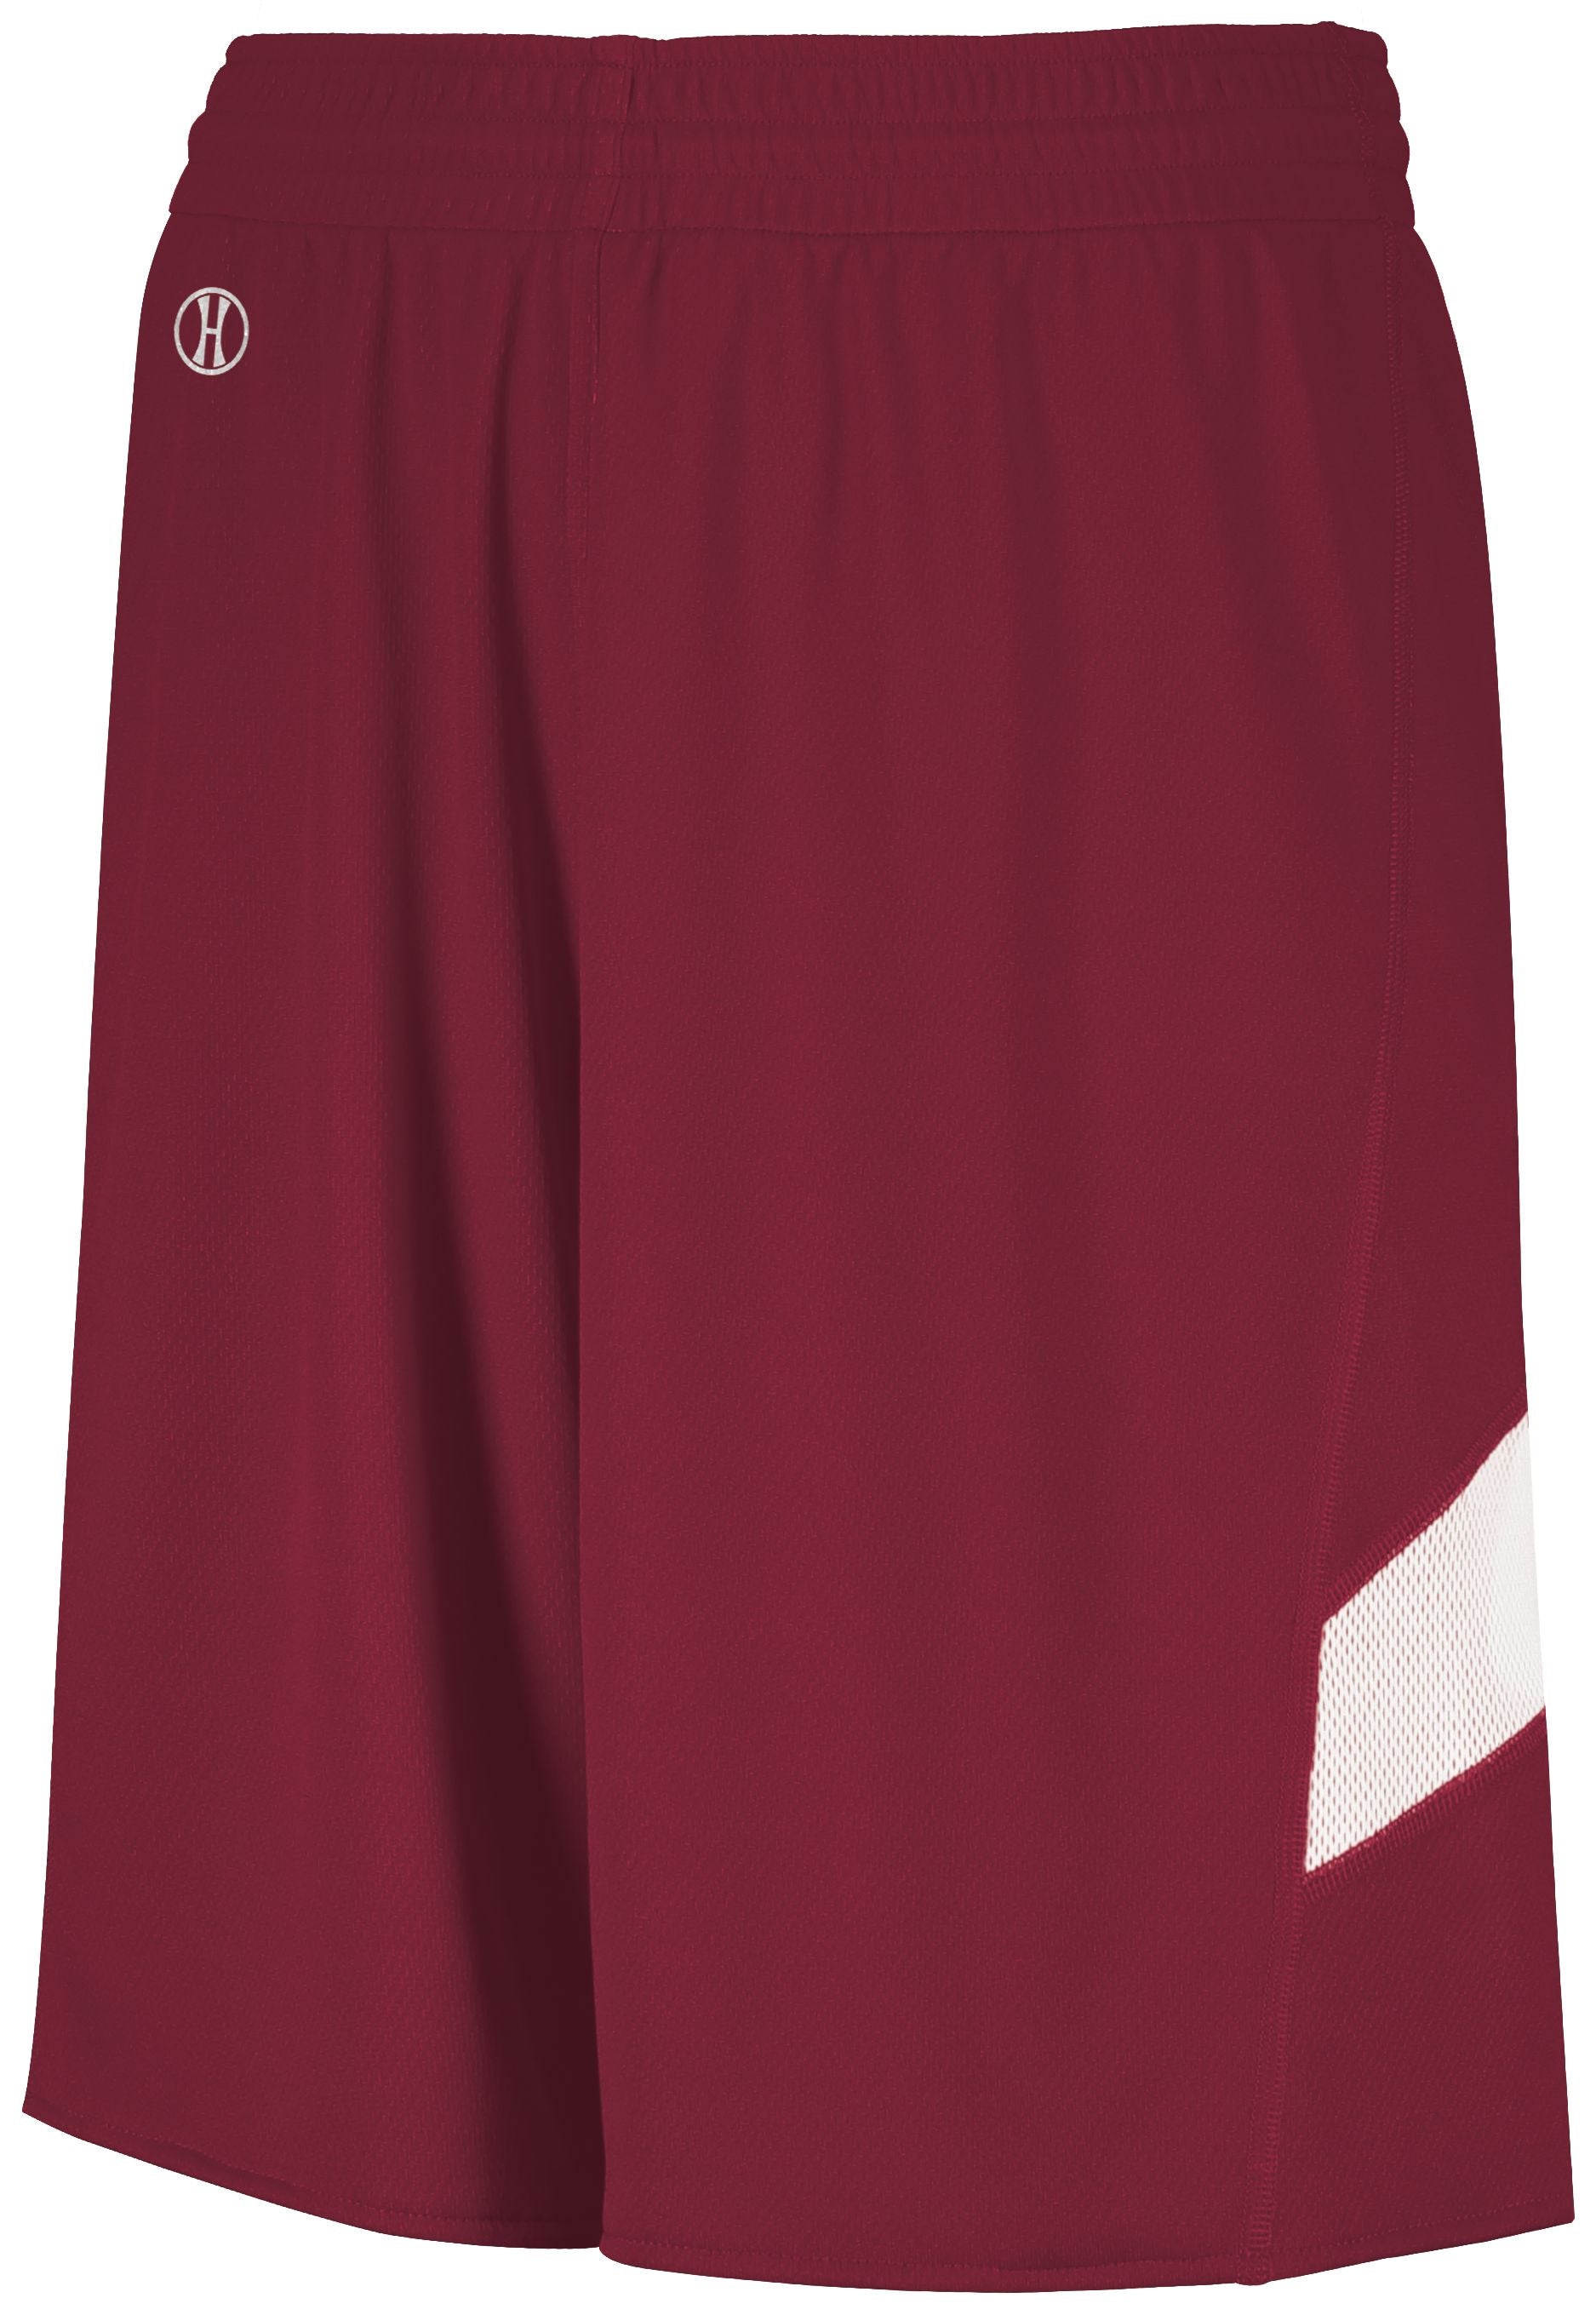 Youth Dual-Side Single Ply Basketball Shorts 224279